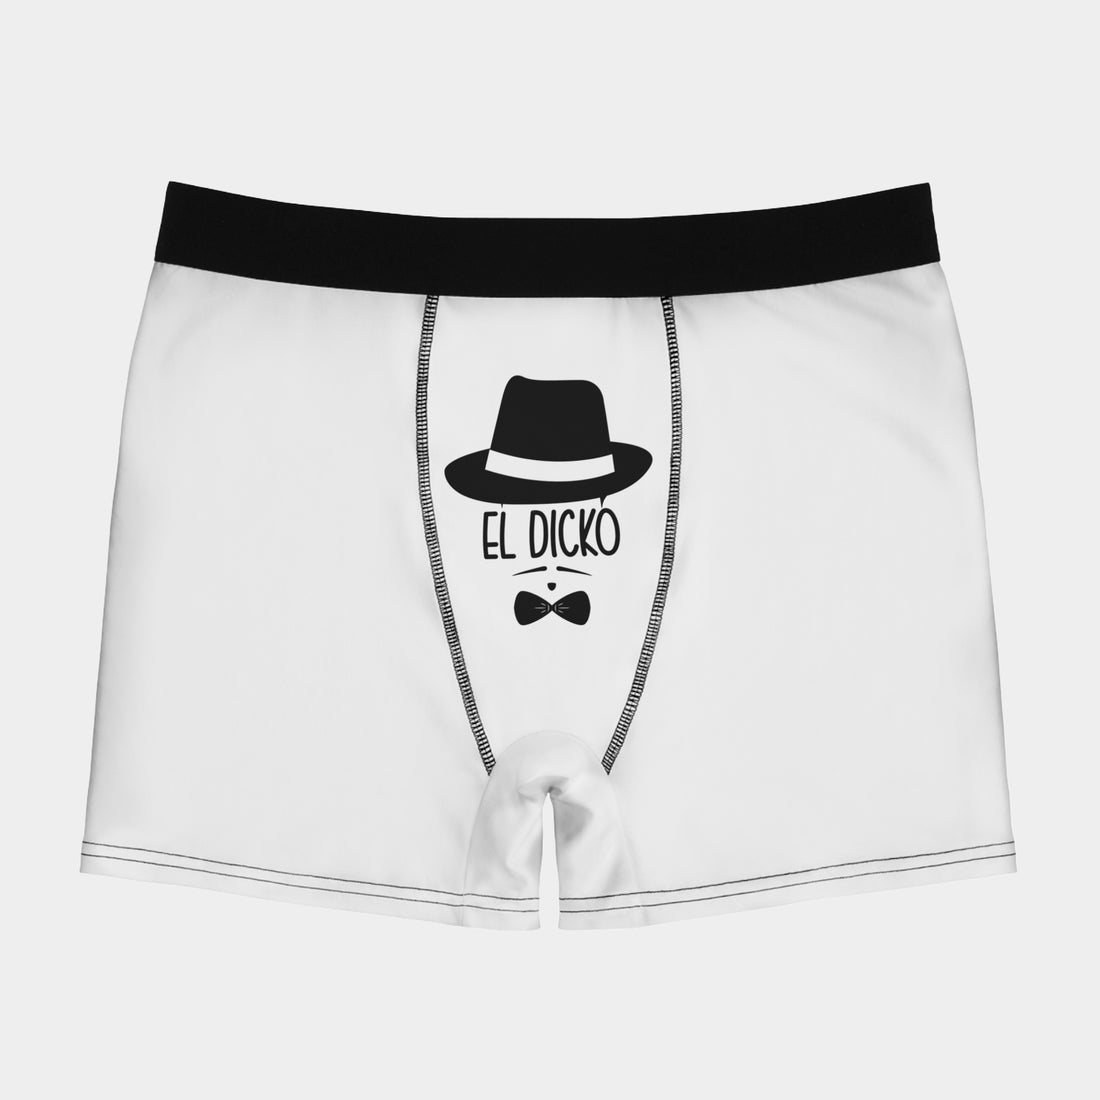 Funny Personalized Boxers For Men